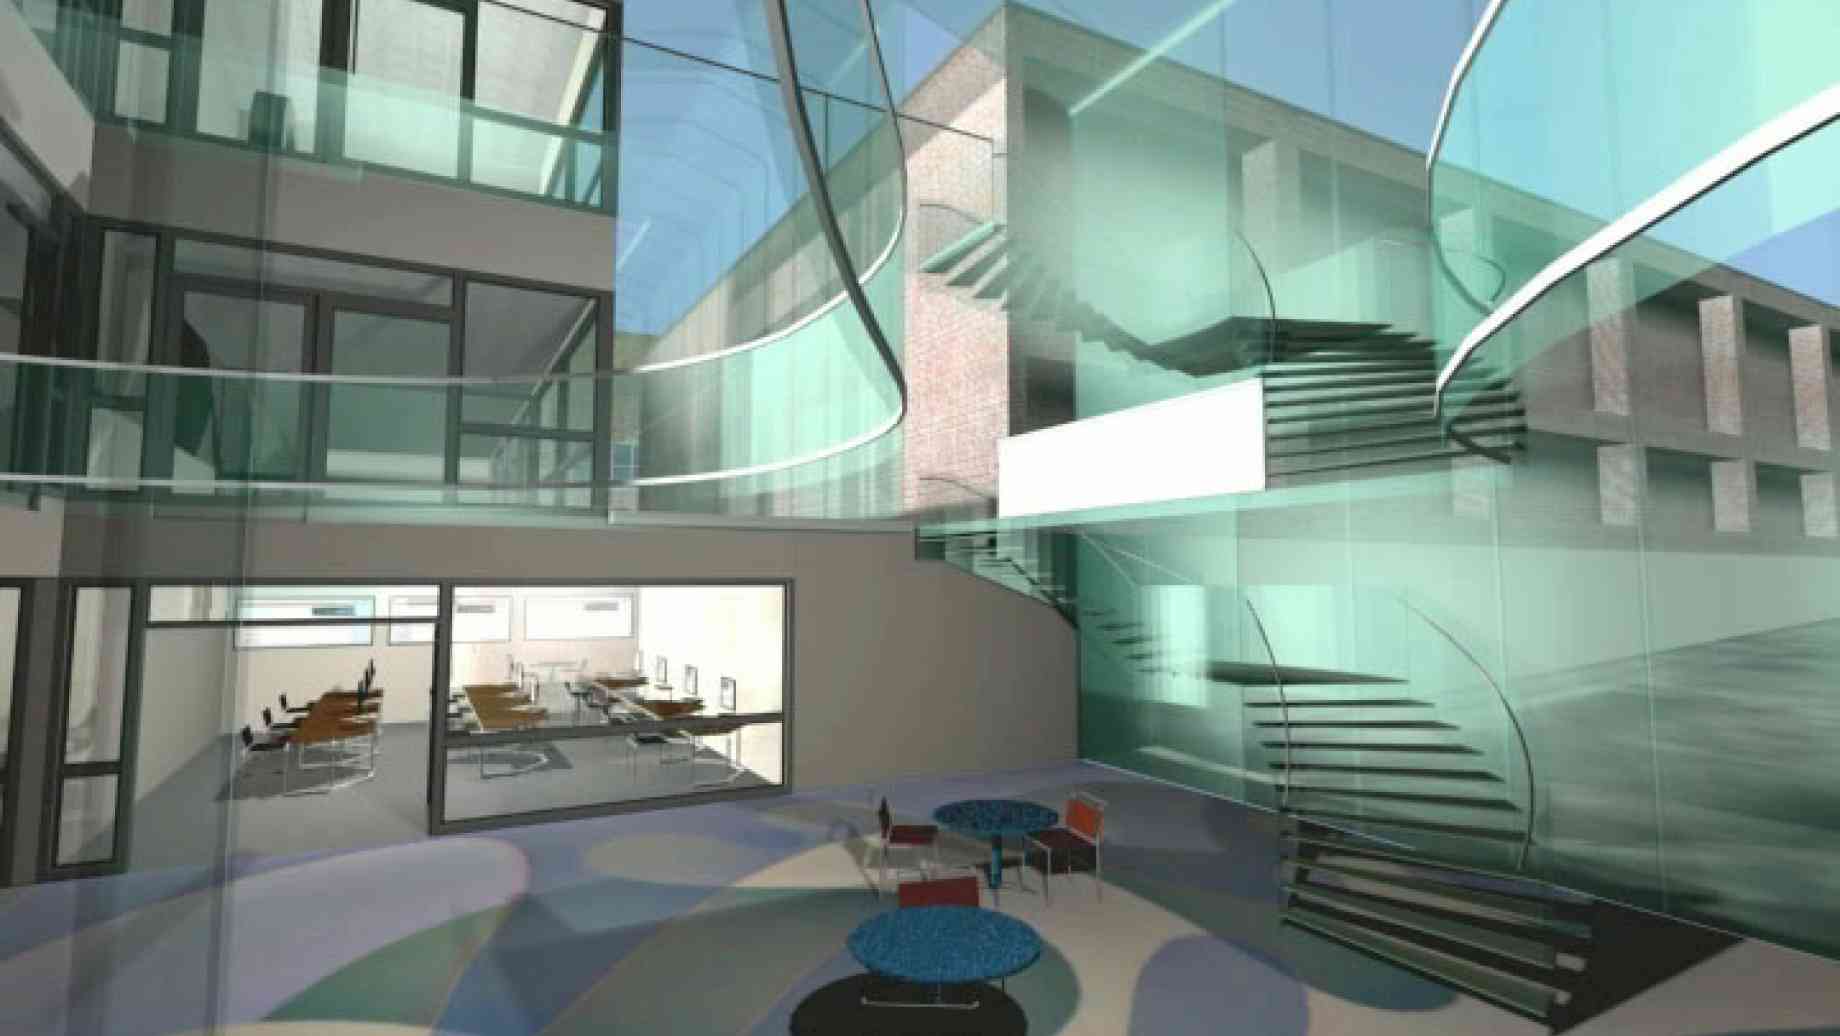 A virtual fly through of the proposed renovations to the College of Education building.